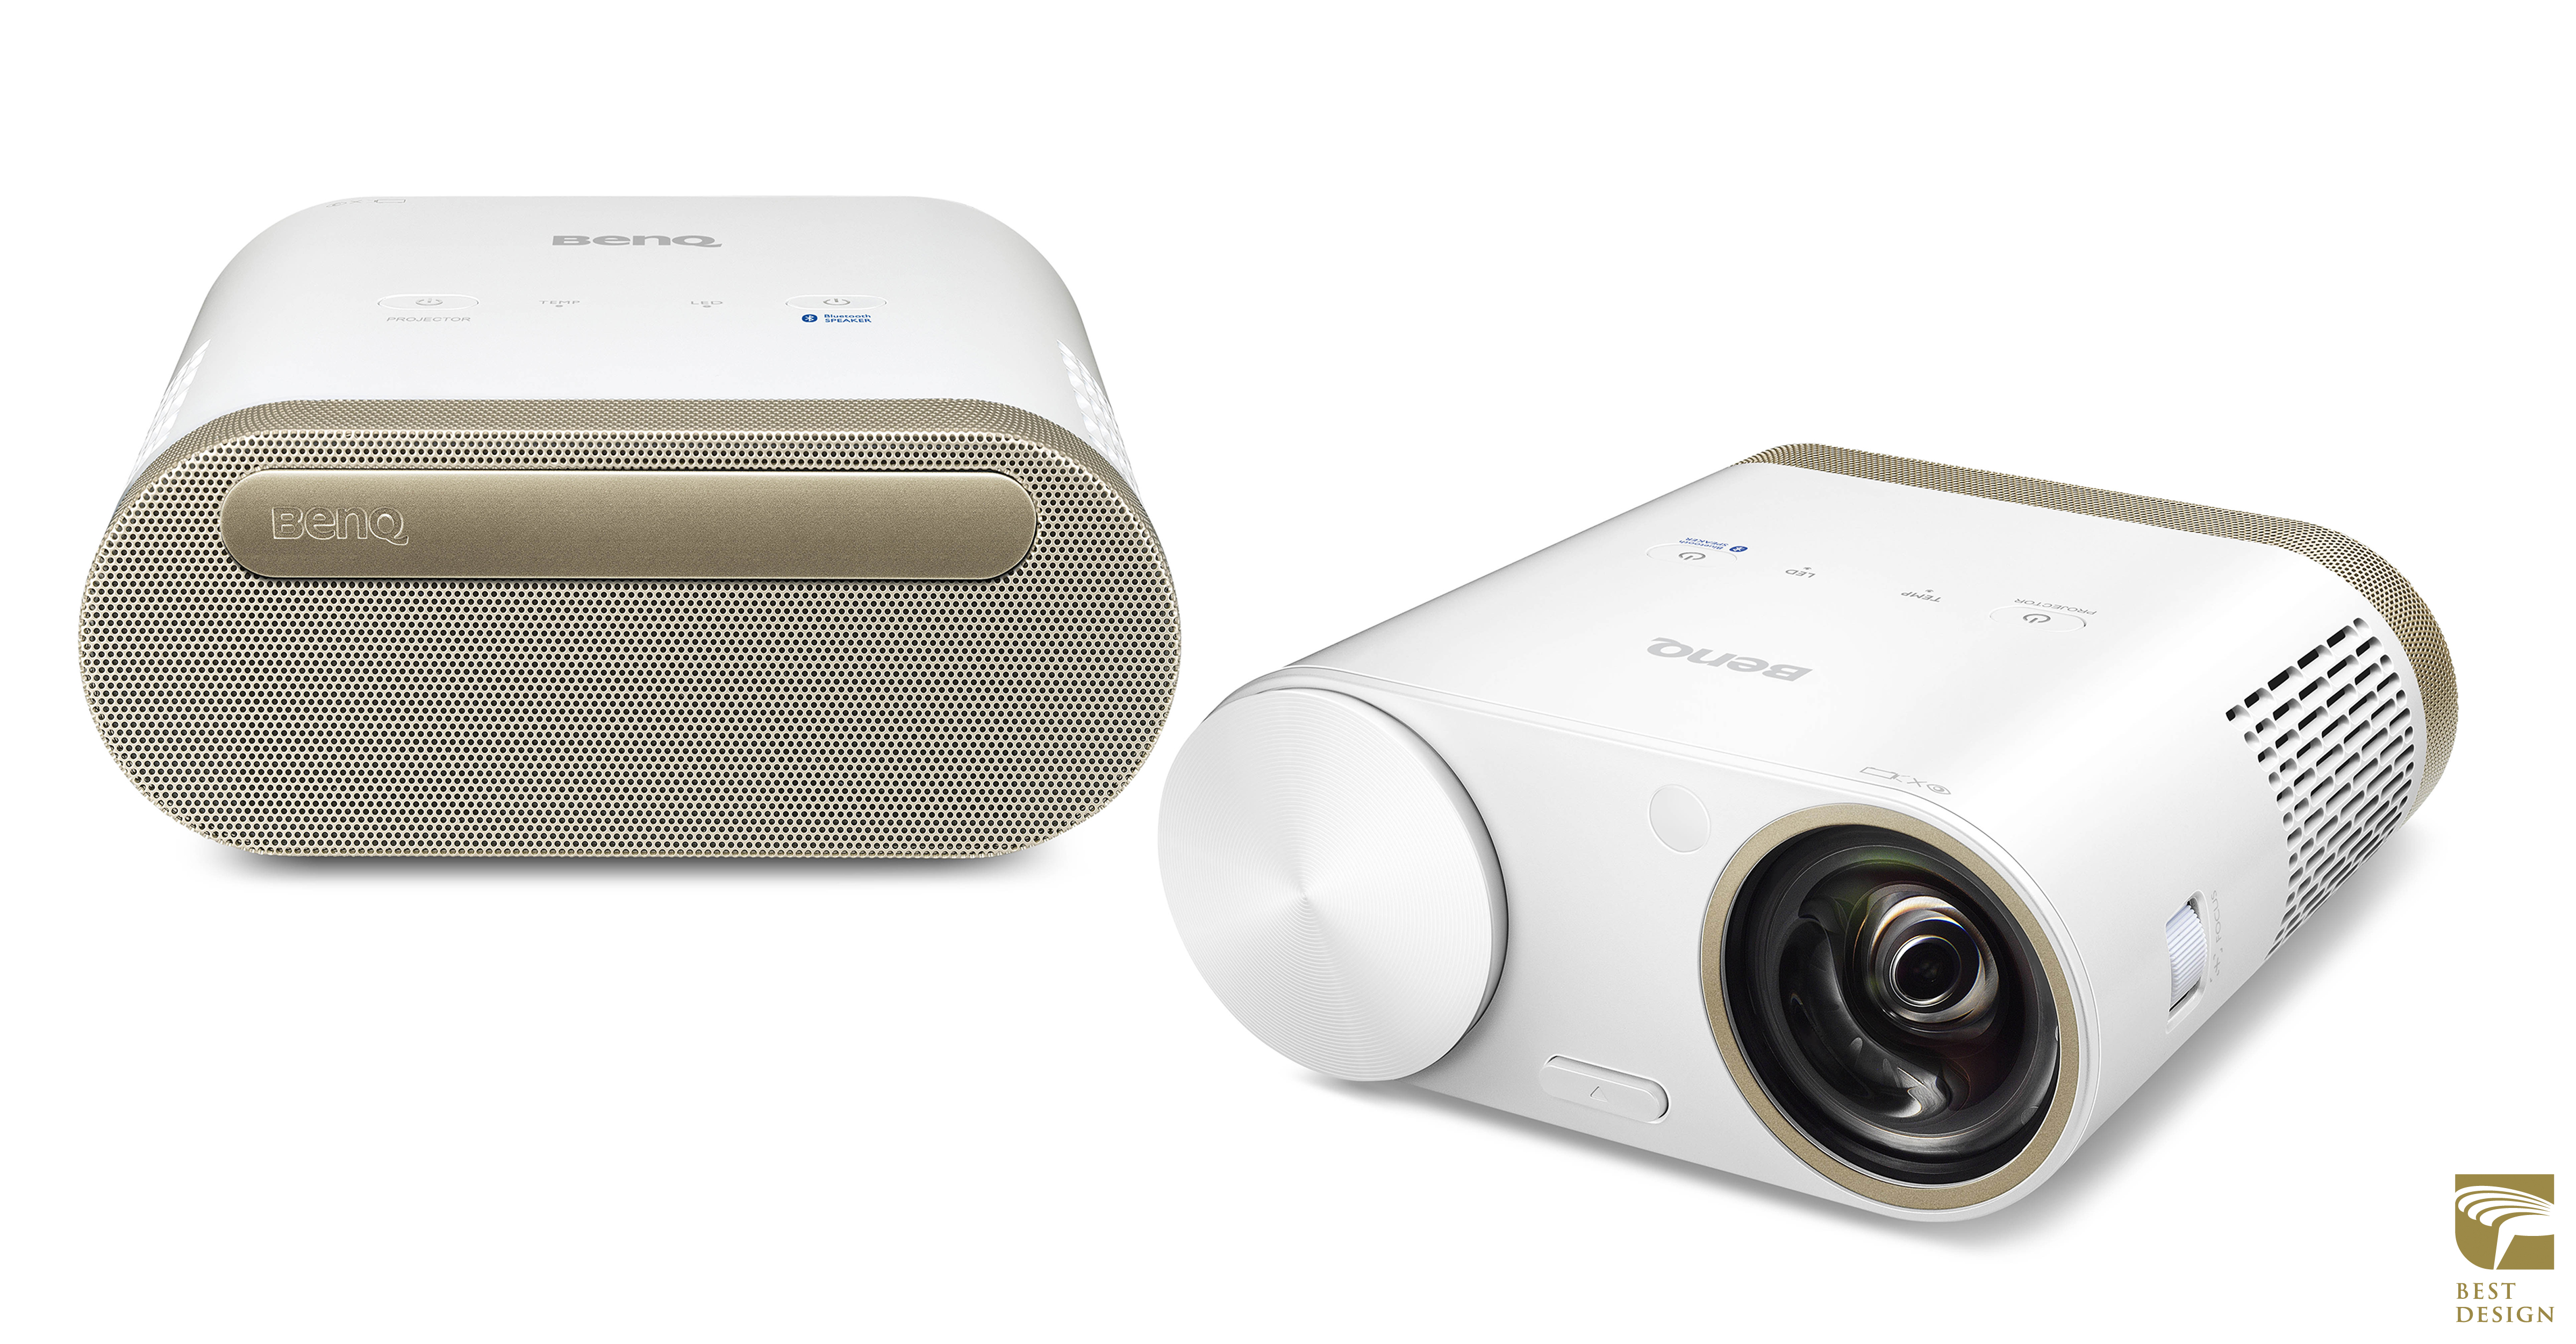 i500 Smart Projector by BenQ Lifestyle Design Center, Image courtesy of Golden Pin Design Awards